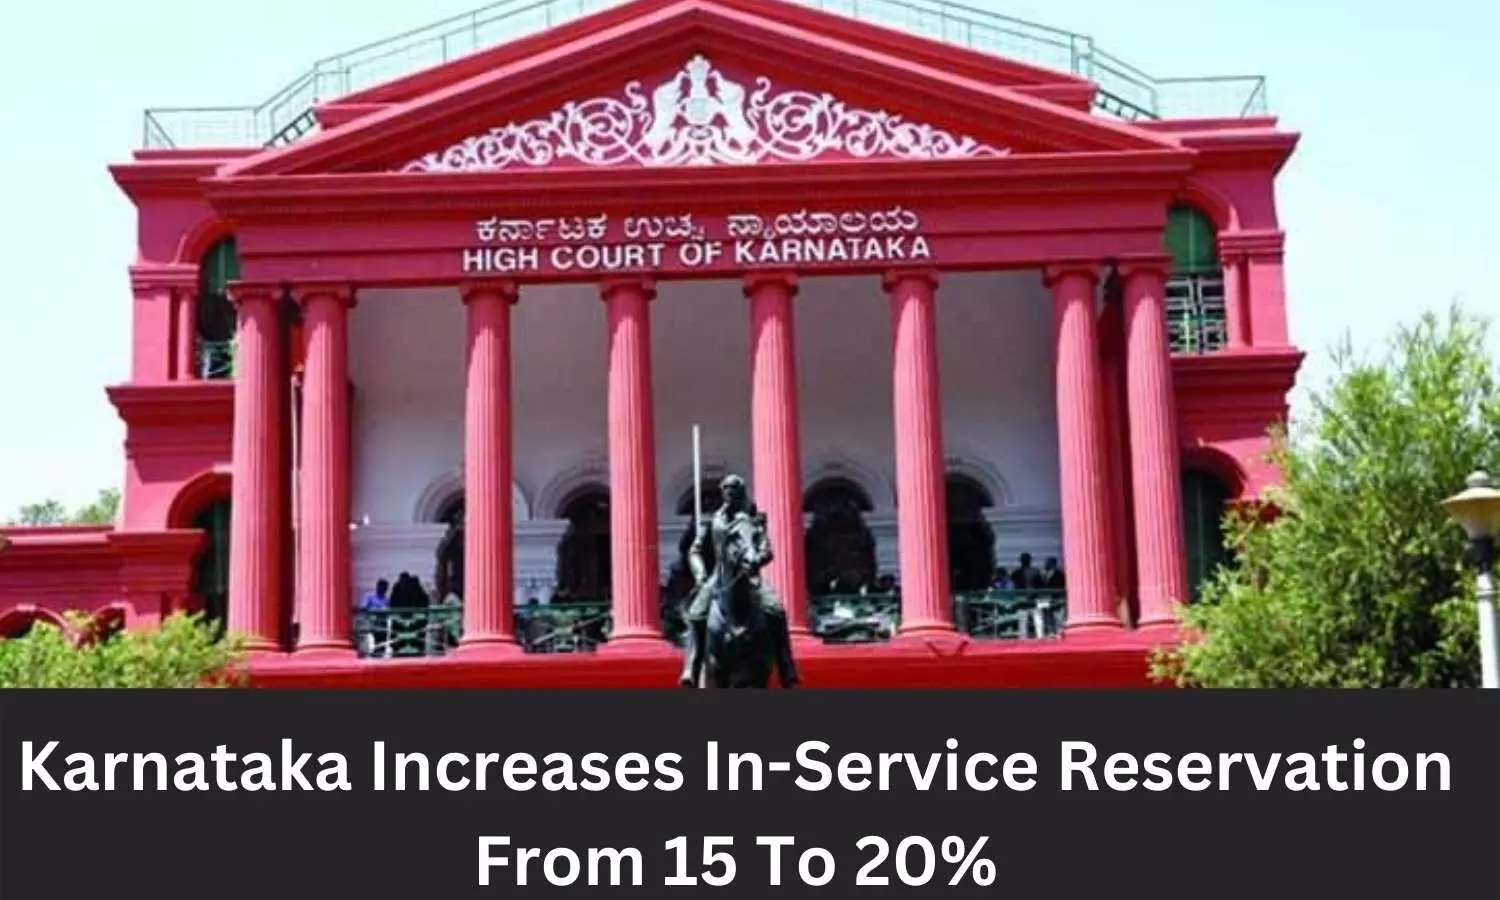 Karnataka increases reservation for In-service doctors from 15 to 20 percent for academic year 2022-23